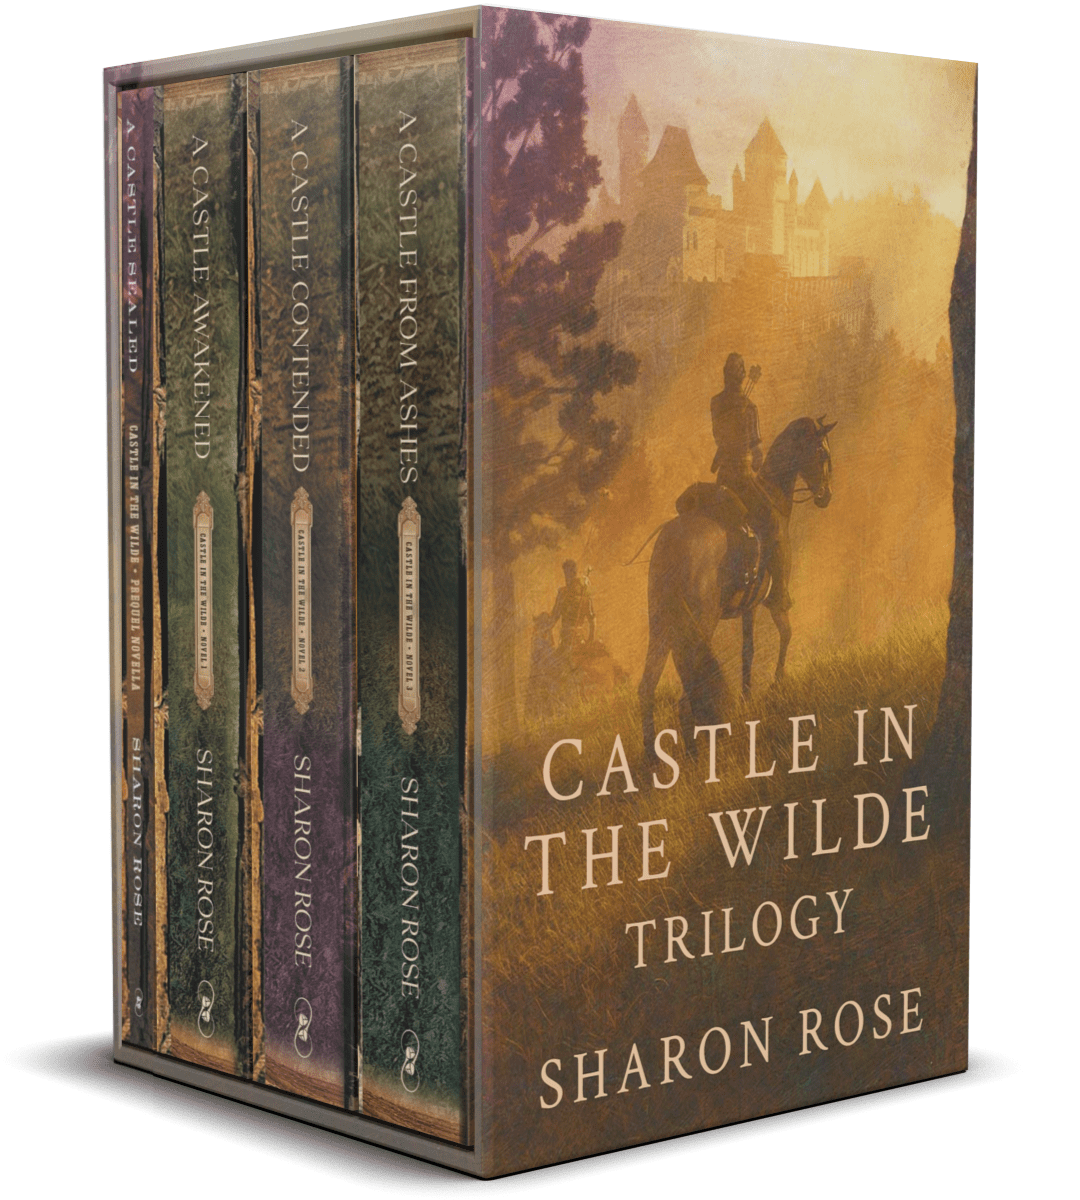 Castle in the Wilde by Sharon Rose